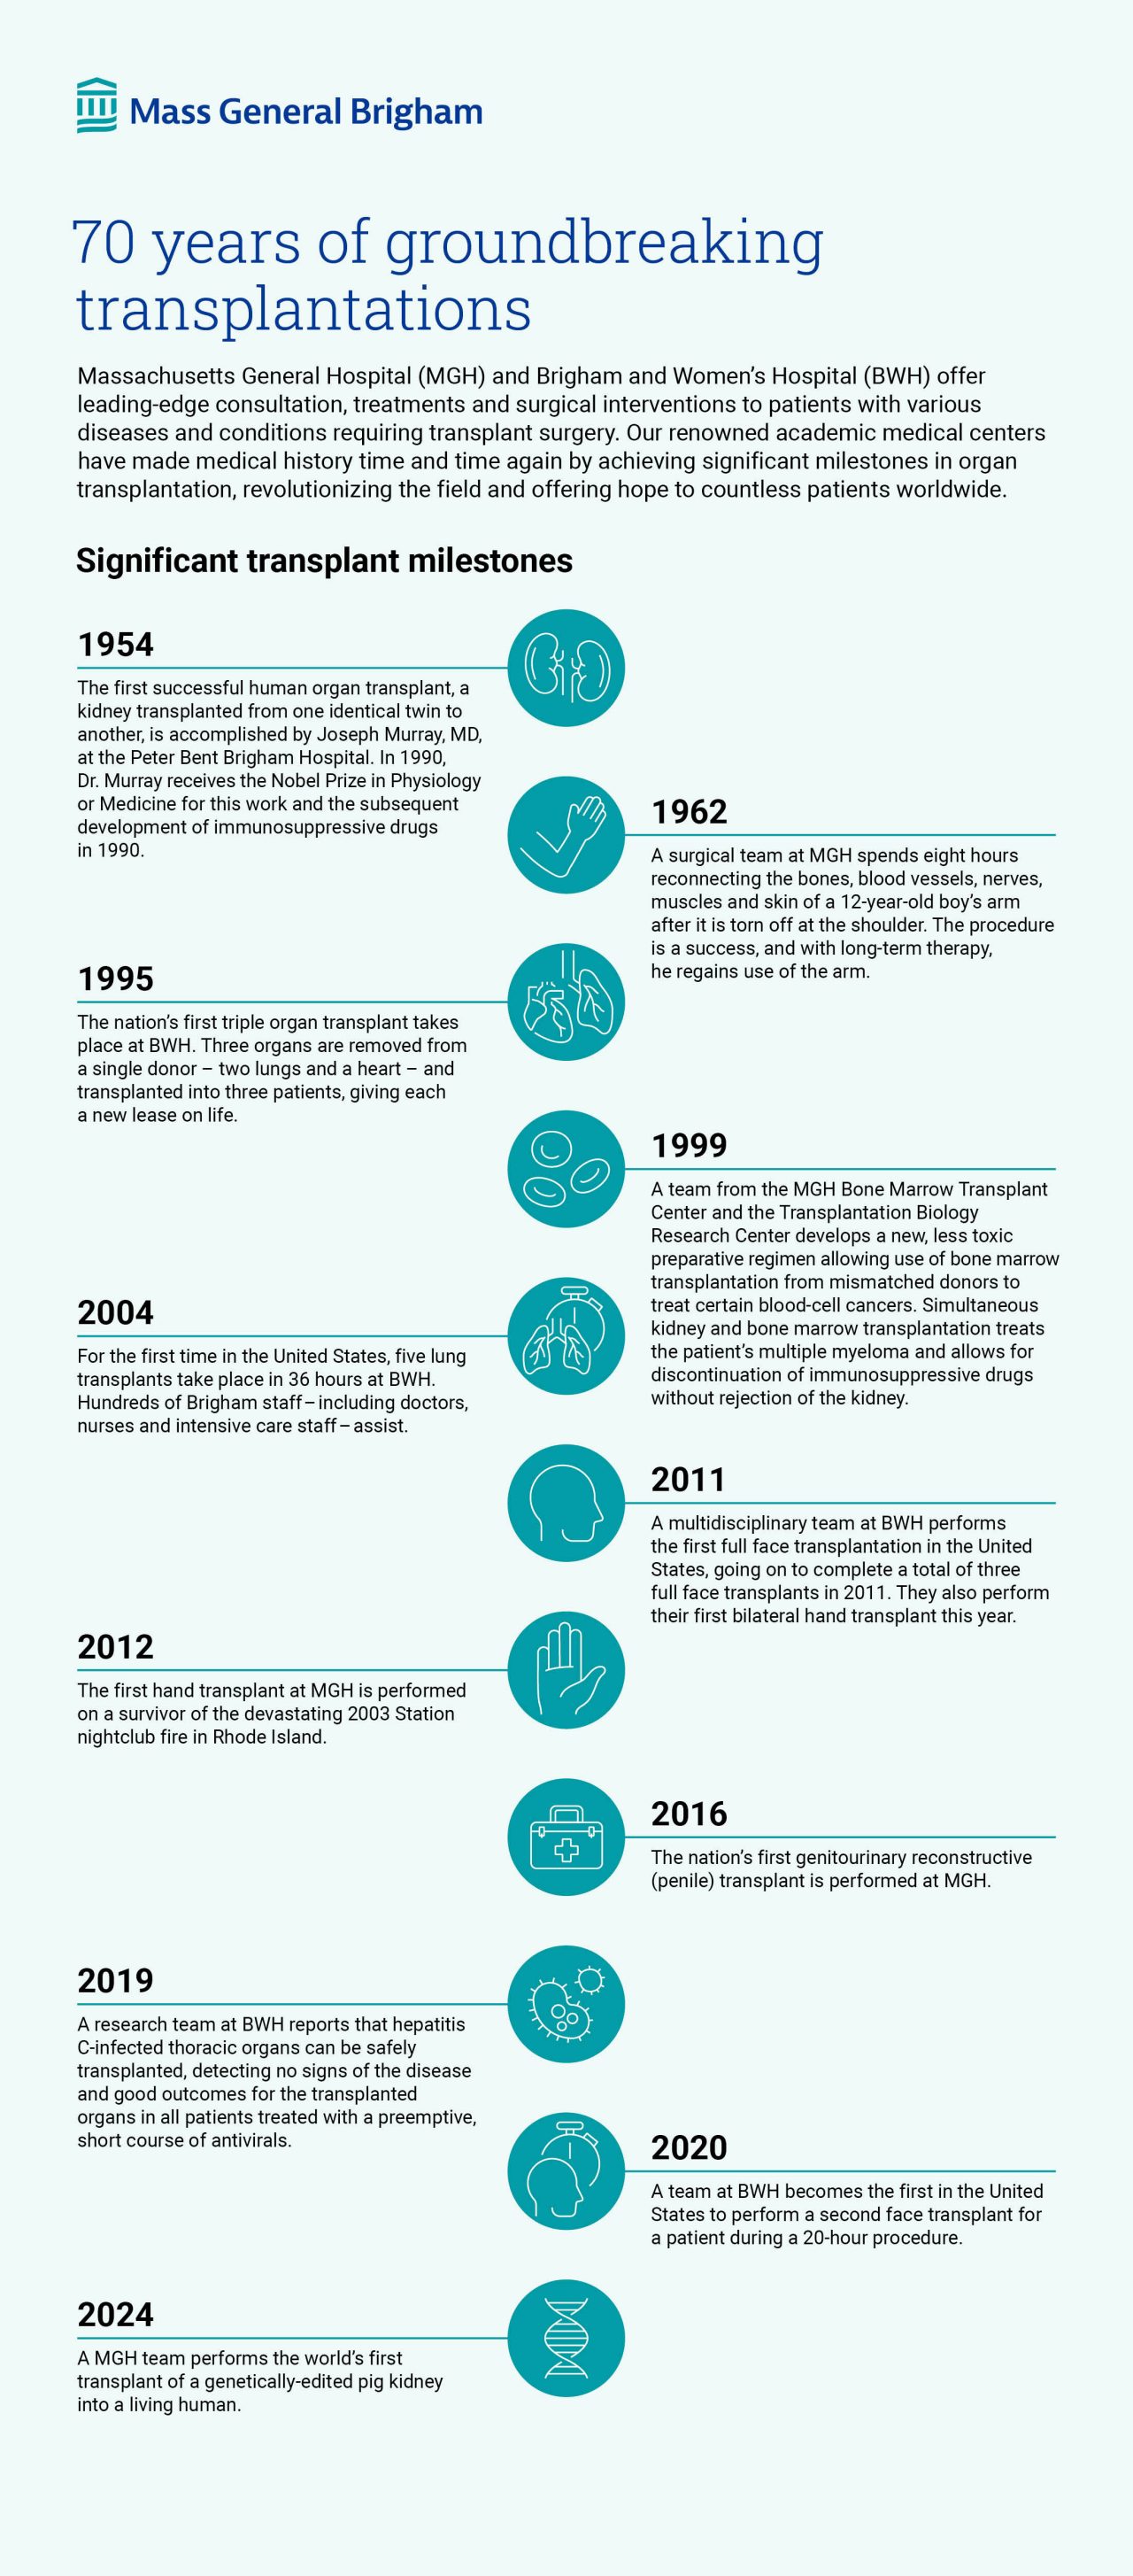 Inforgraphic with a timeline of significant transplant milestones from Mass General Brigham.